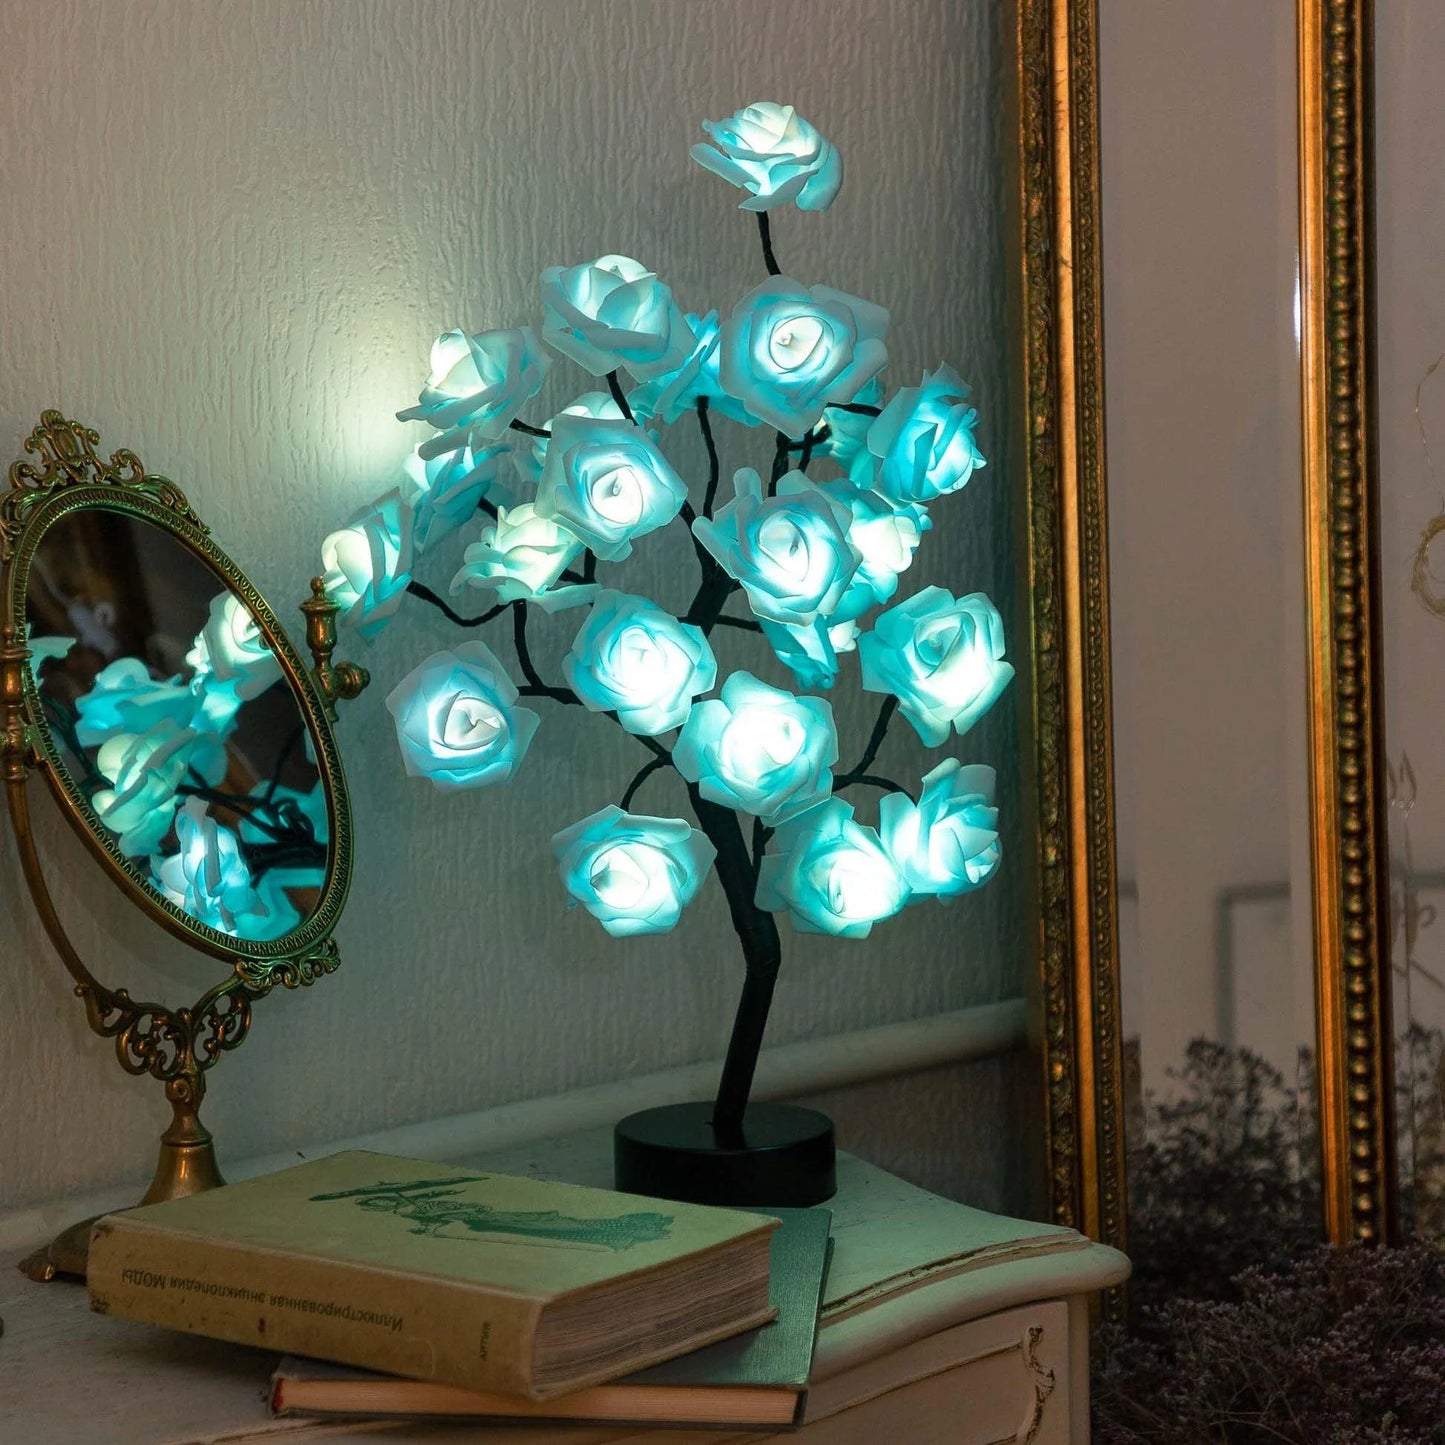 Enchanted Blossom Tree Lamp - Handcrafted, Warm White LED, Romantic Home Decor Light